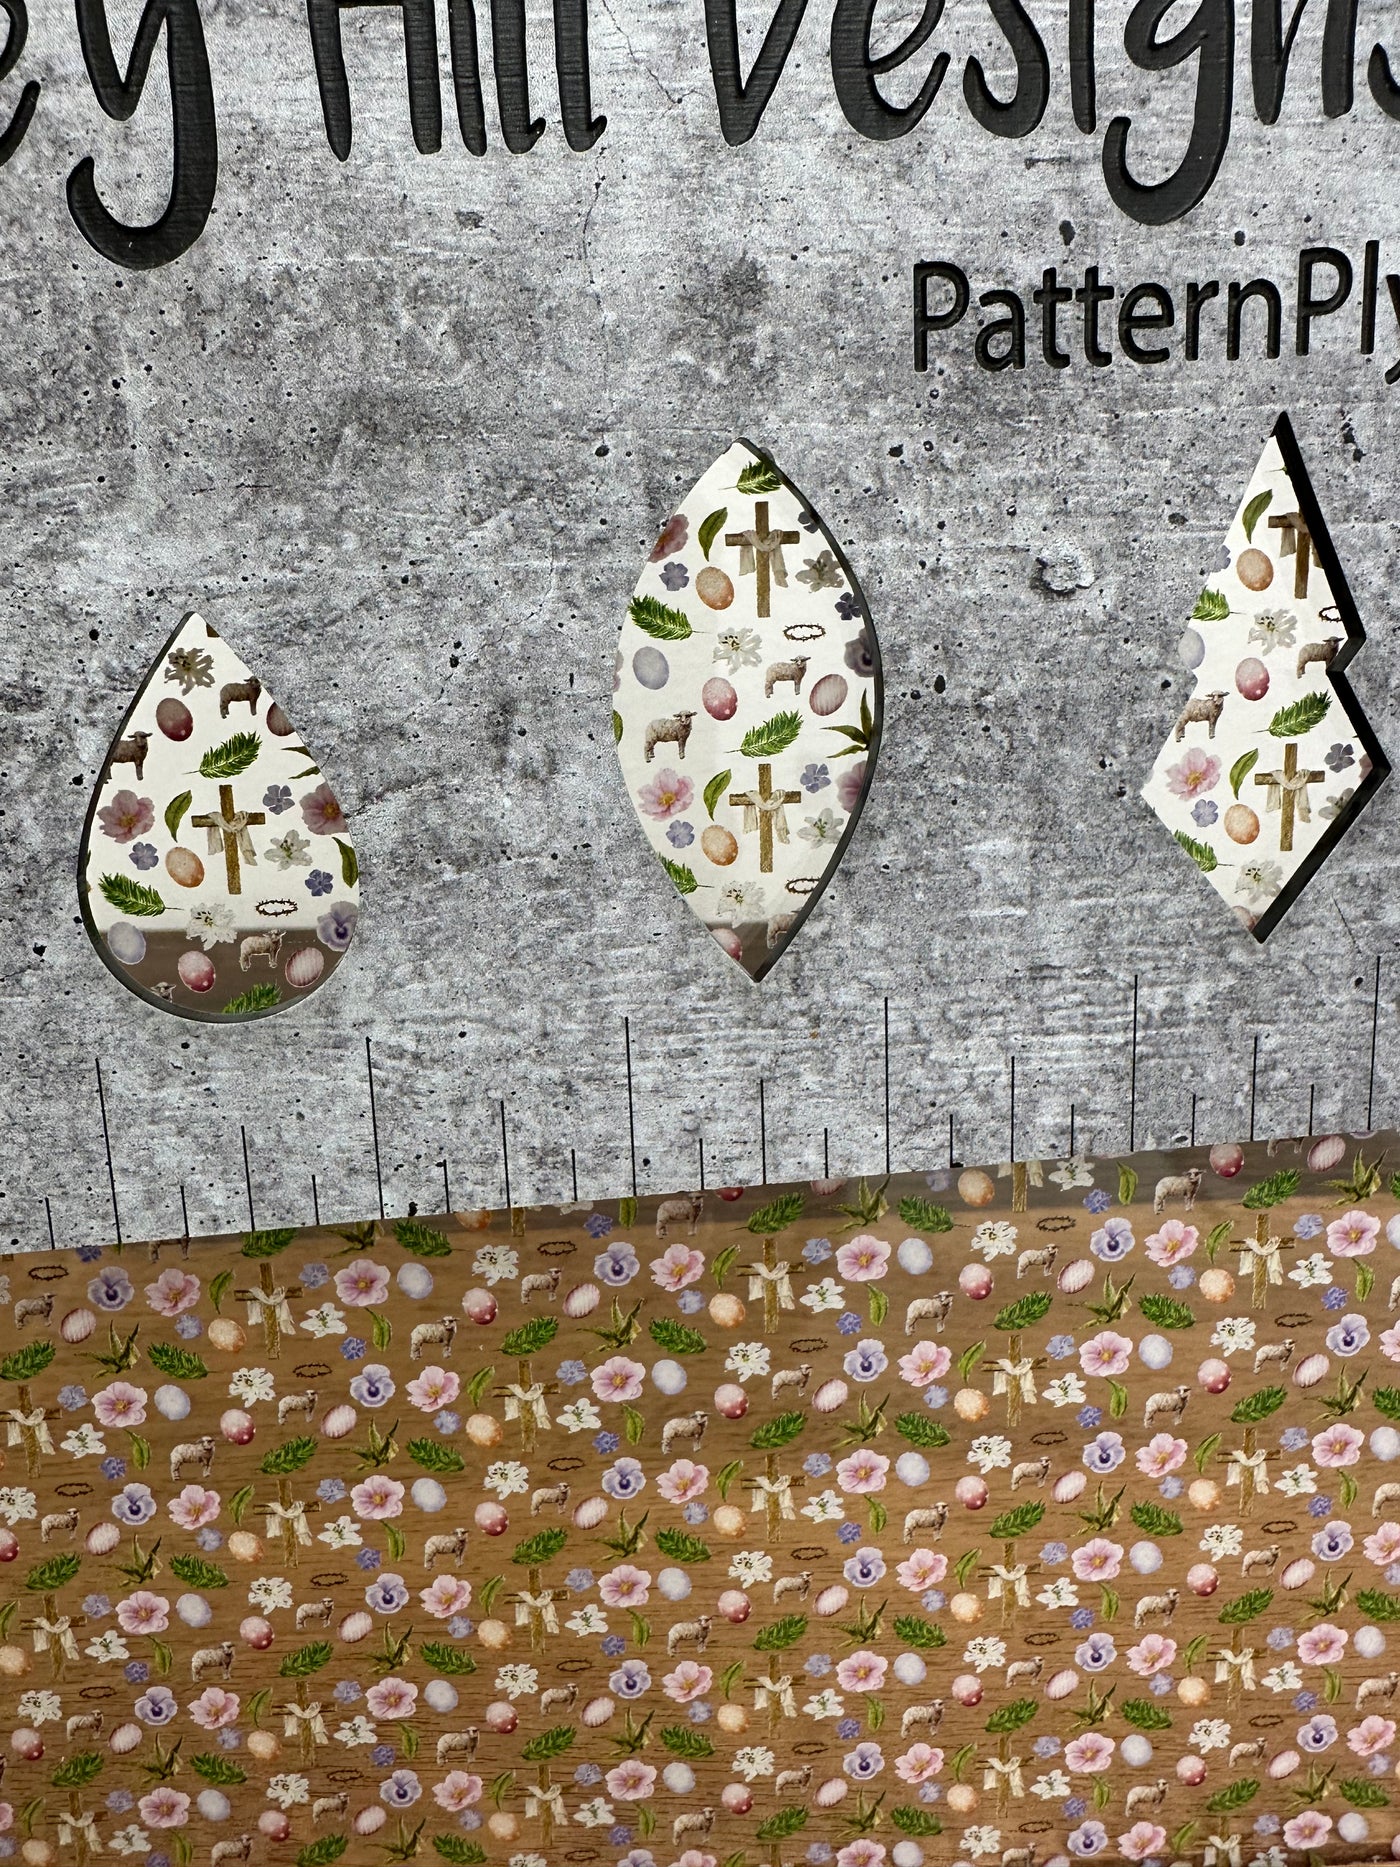 PatternPly® Scattered Micro Christian Easter Symbols